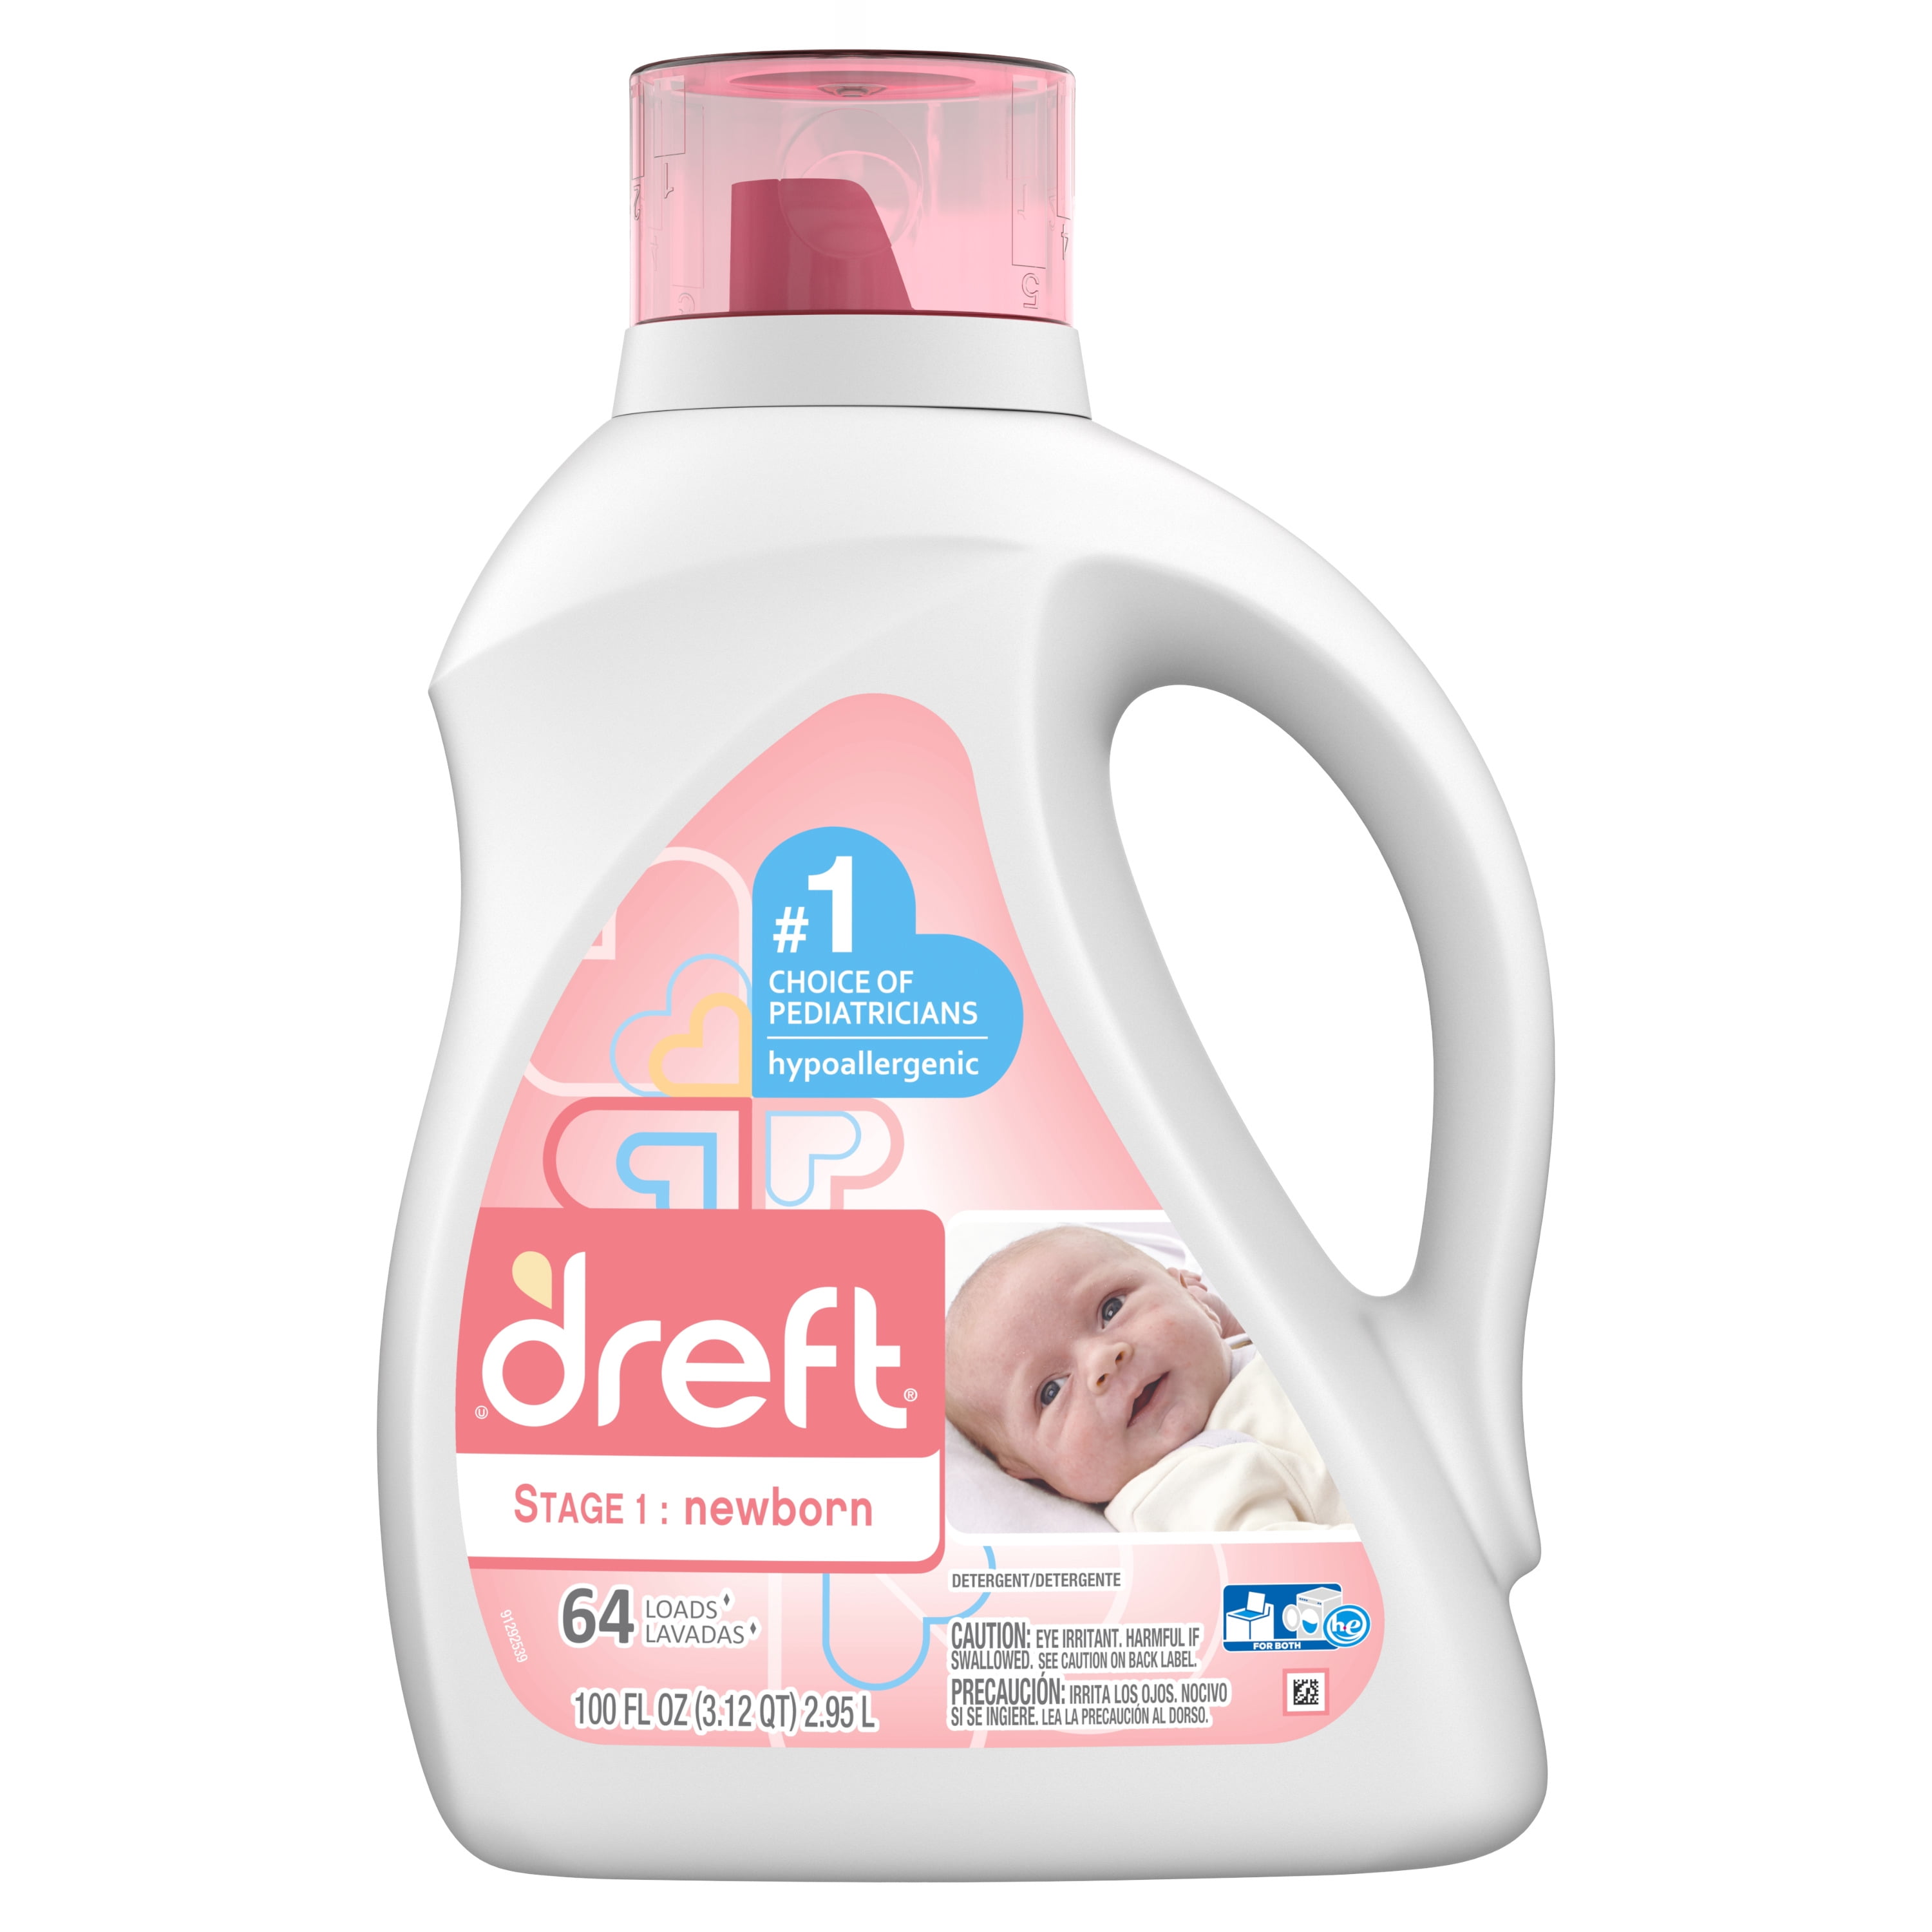 Is There A Recall On Dreft Laundry Detergent